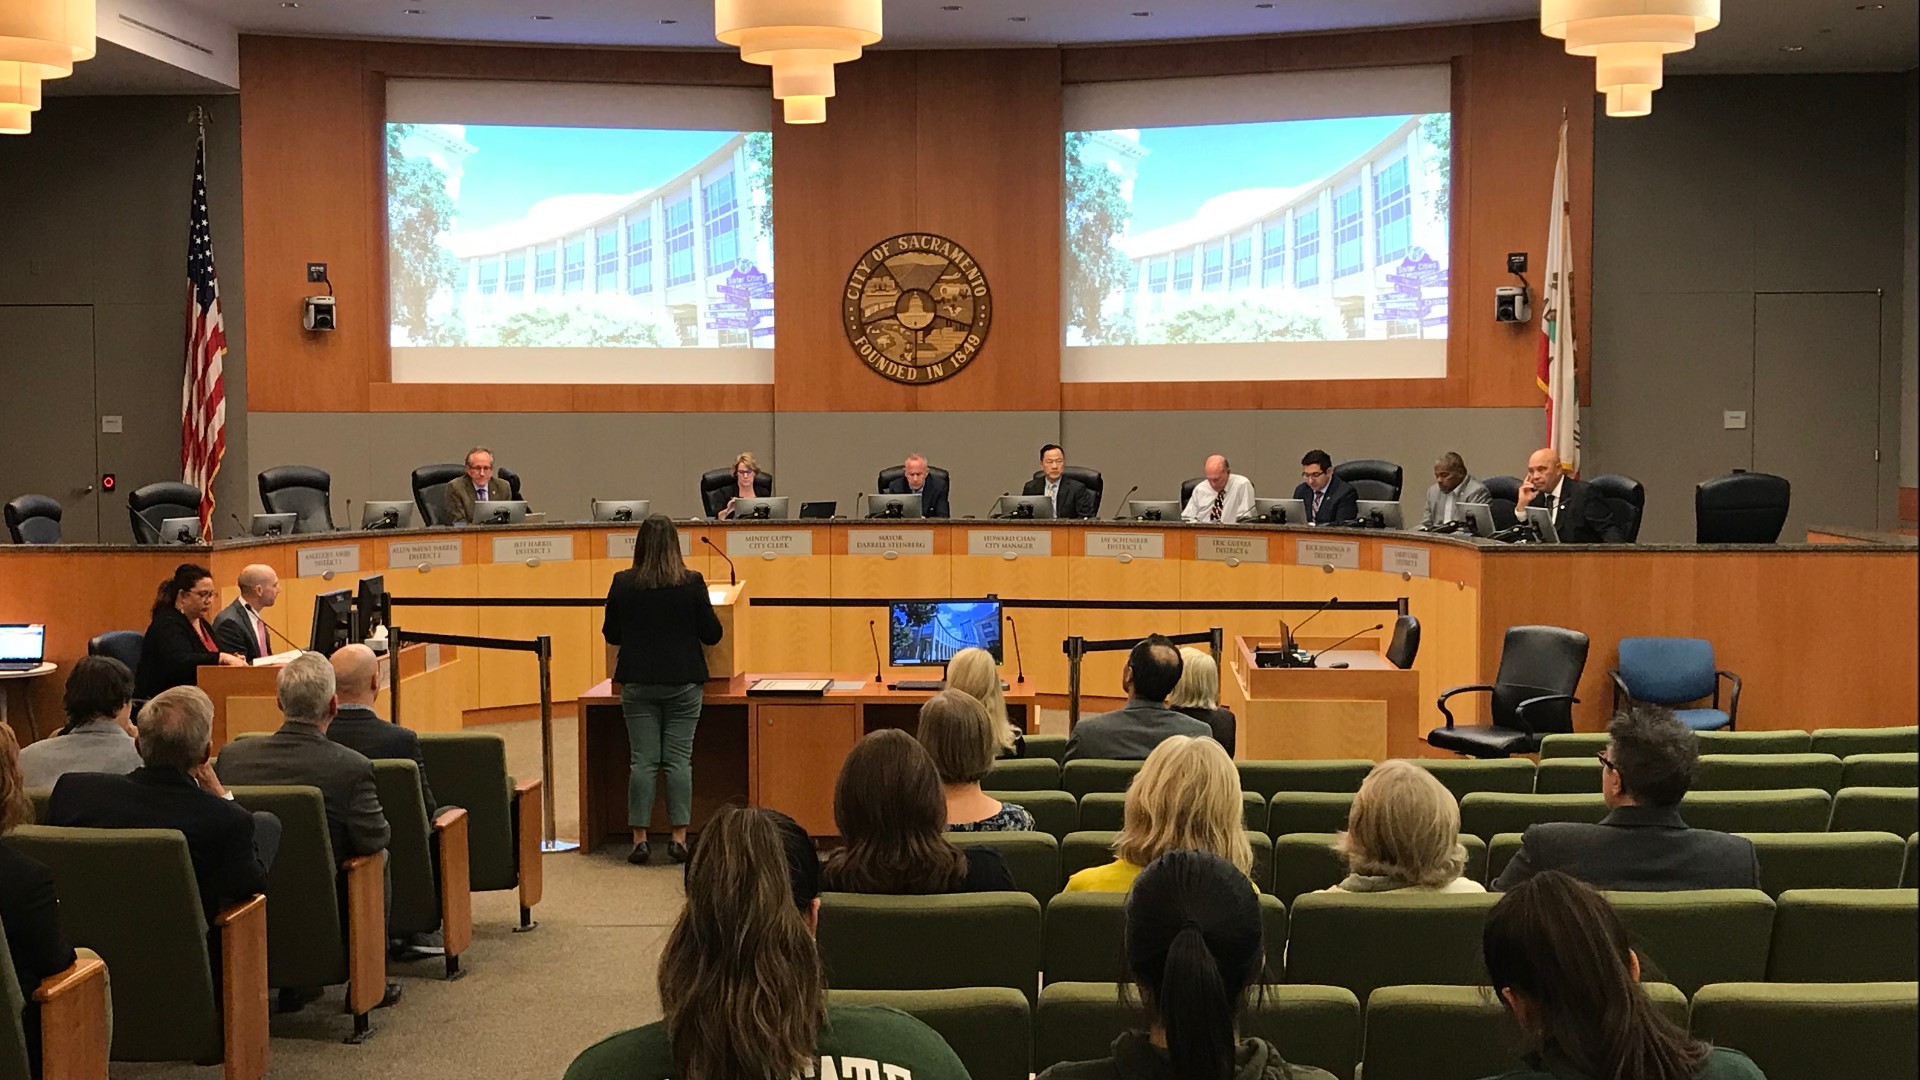 The Sacramento City Council approved a million dollars in funding for two shelters that provide services for women and children experiencing homelessness.